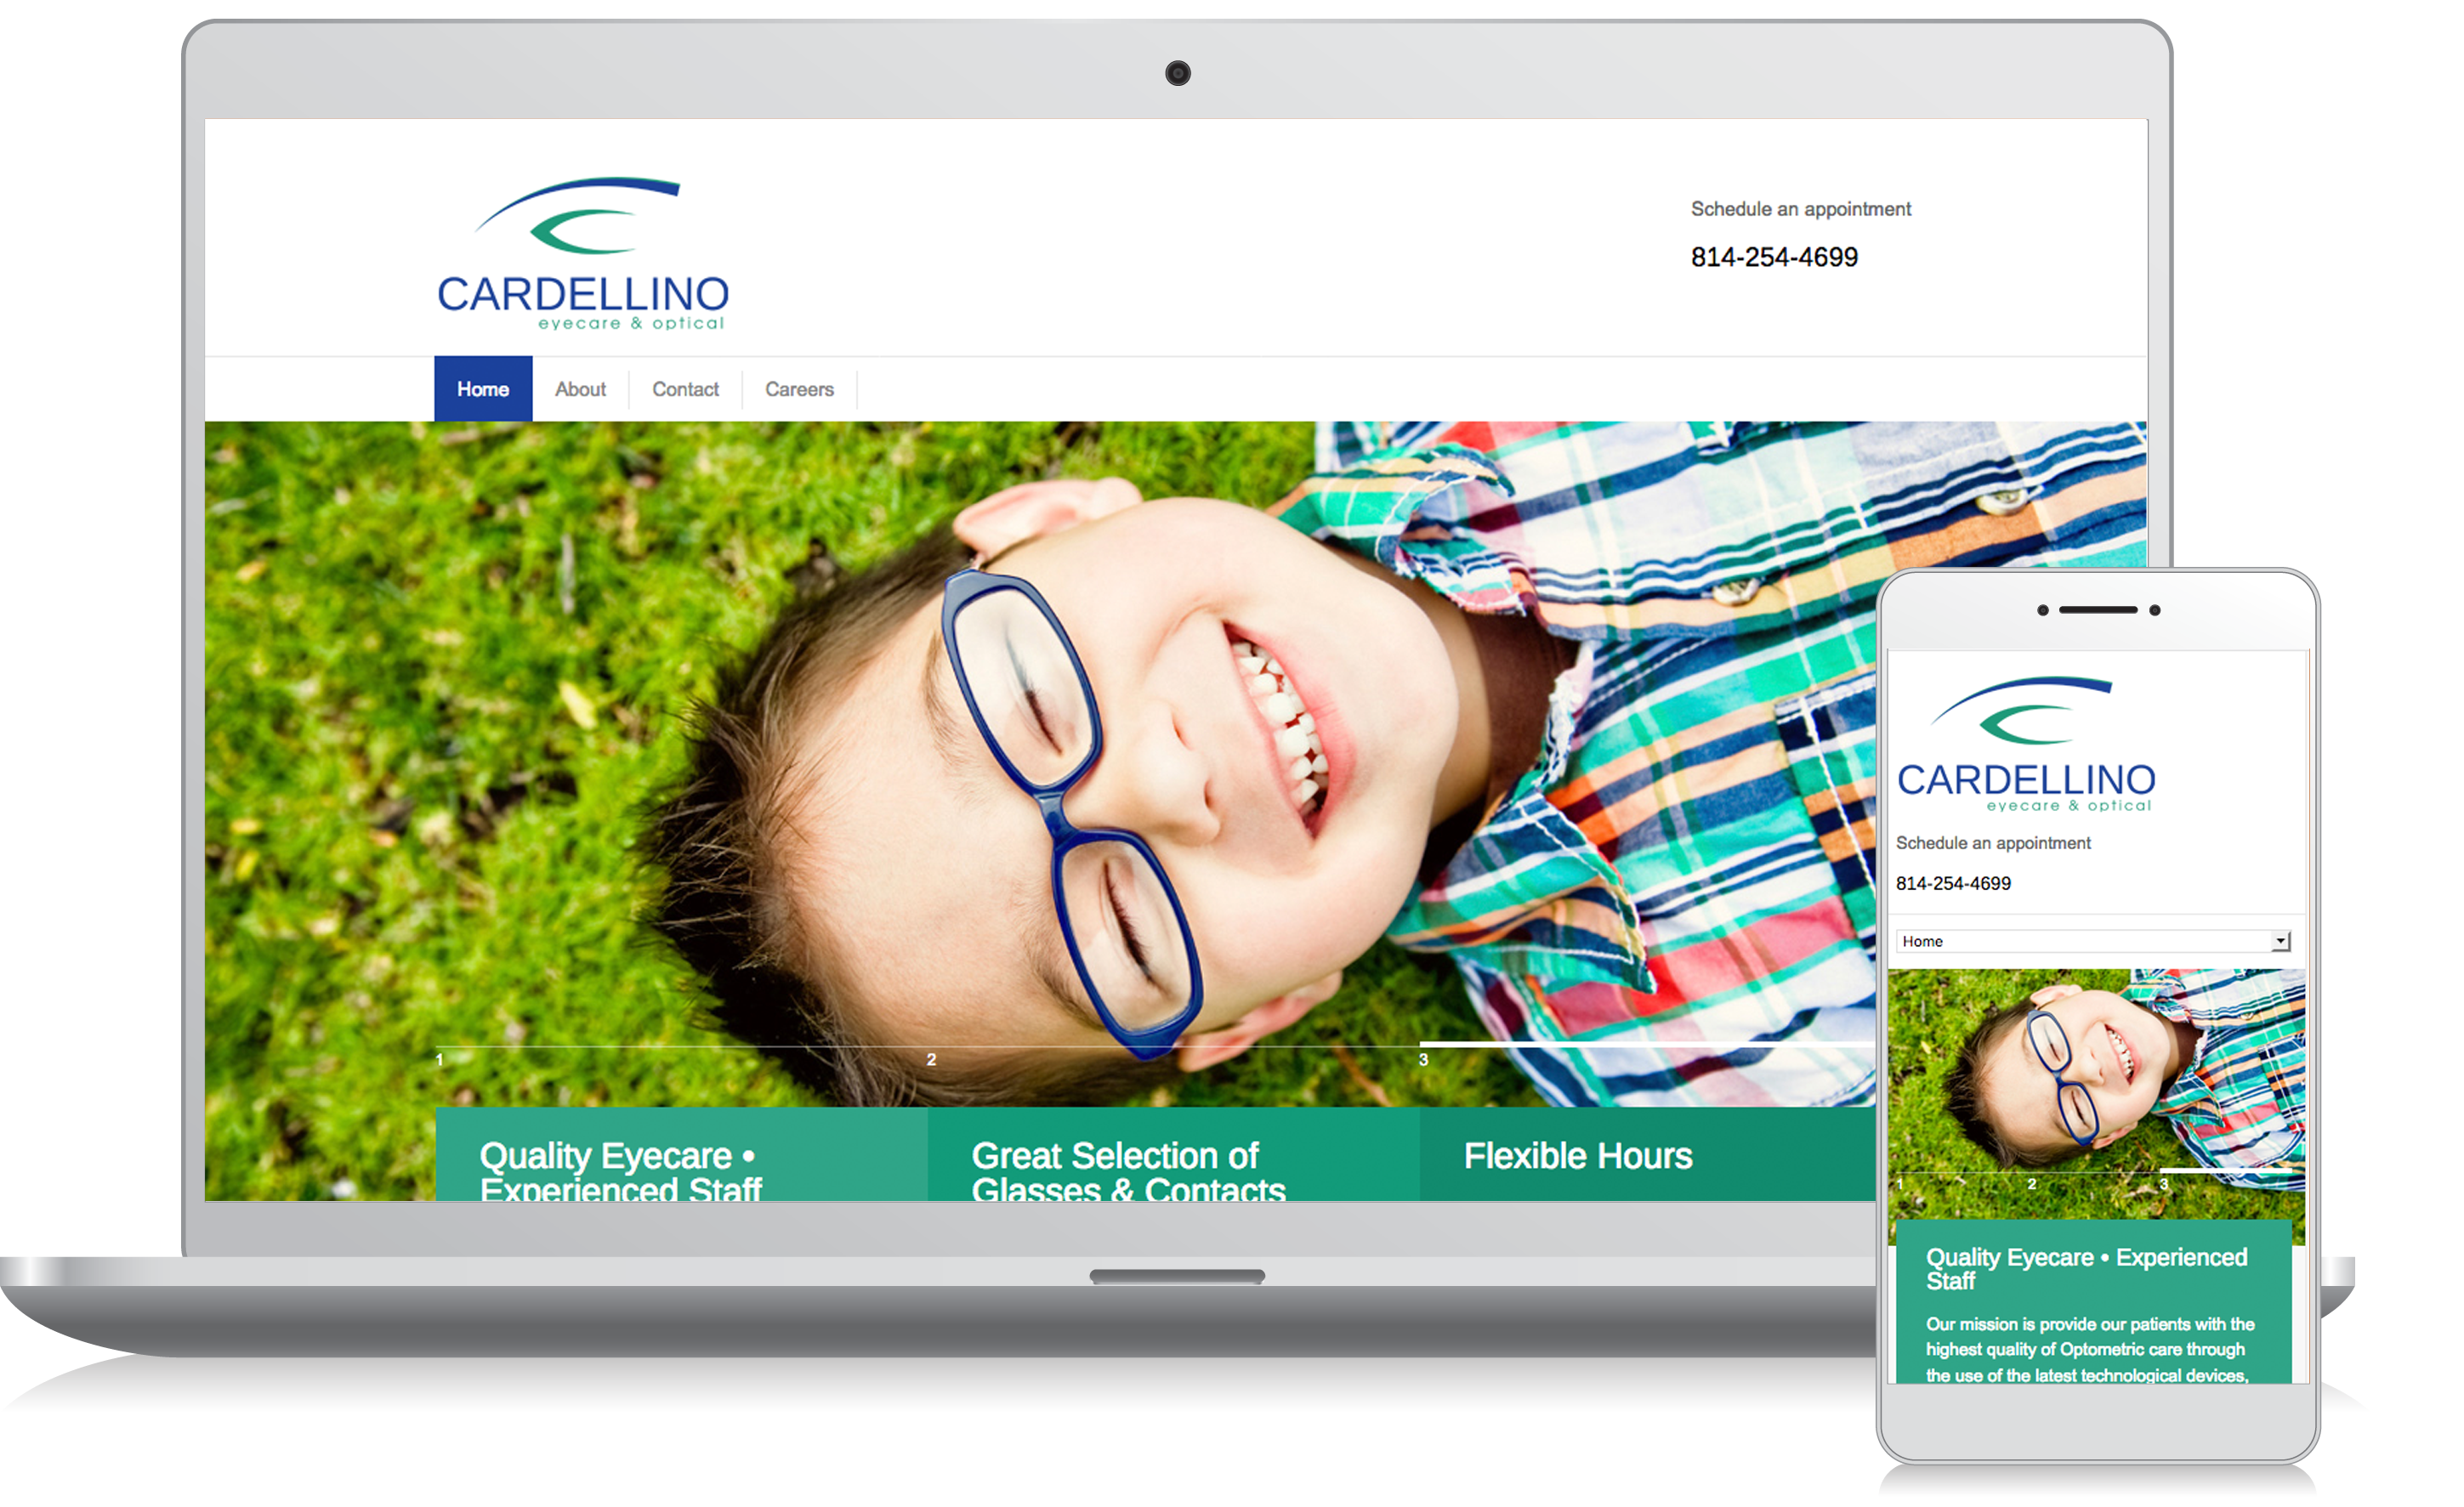 Cellphone and computer image of the Cardellino Eyecare website homepage